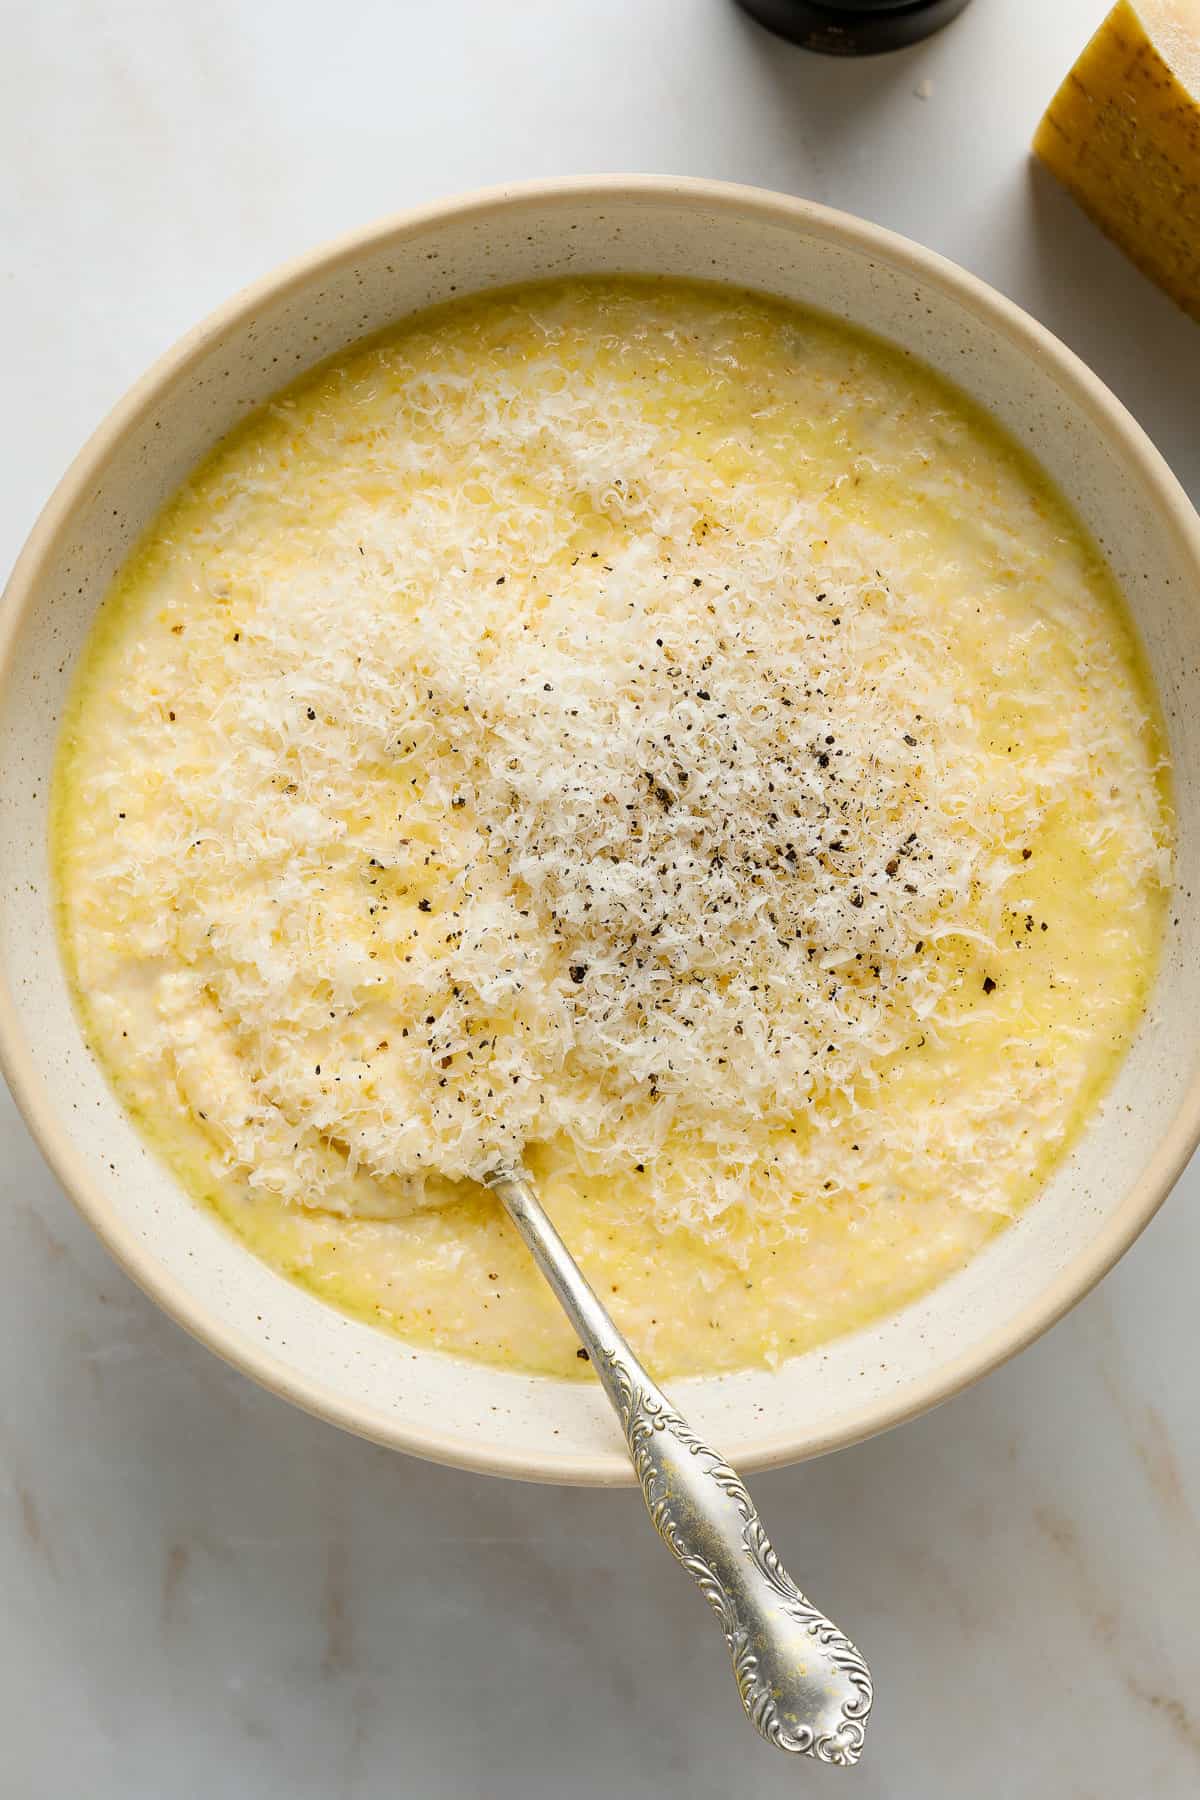 A silver, antique spoon digging into a bowl of creamy, pale yellow polenta topped with grated parmesan cheese and cracked black pepper.